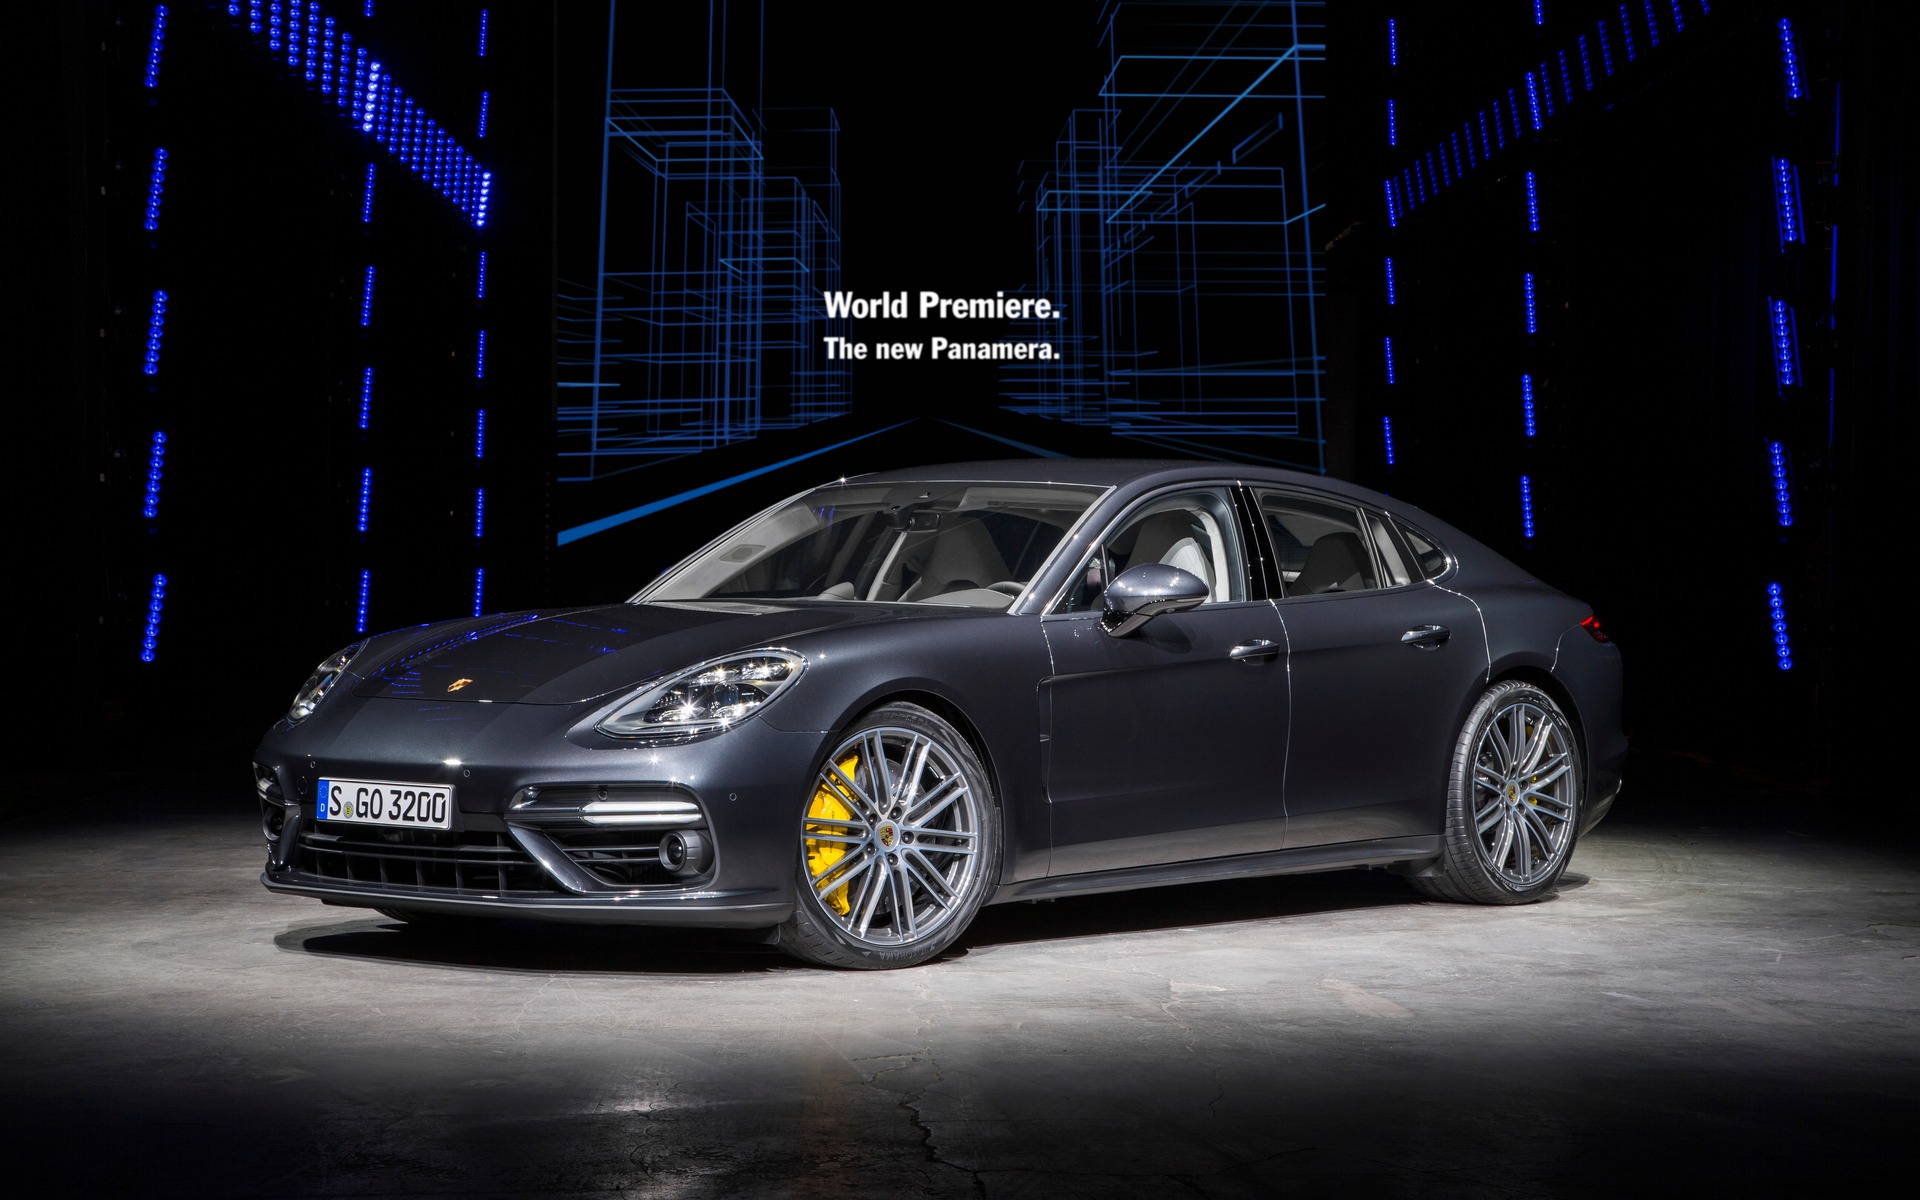 The Panamera Turbo unveiled for the first time worldwide in Berlin.